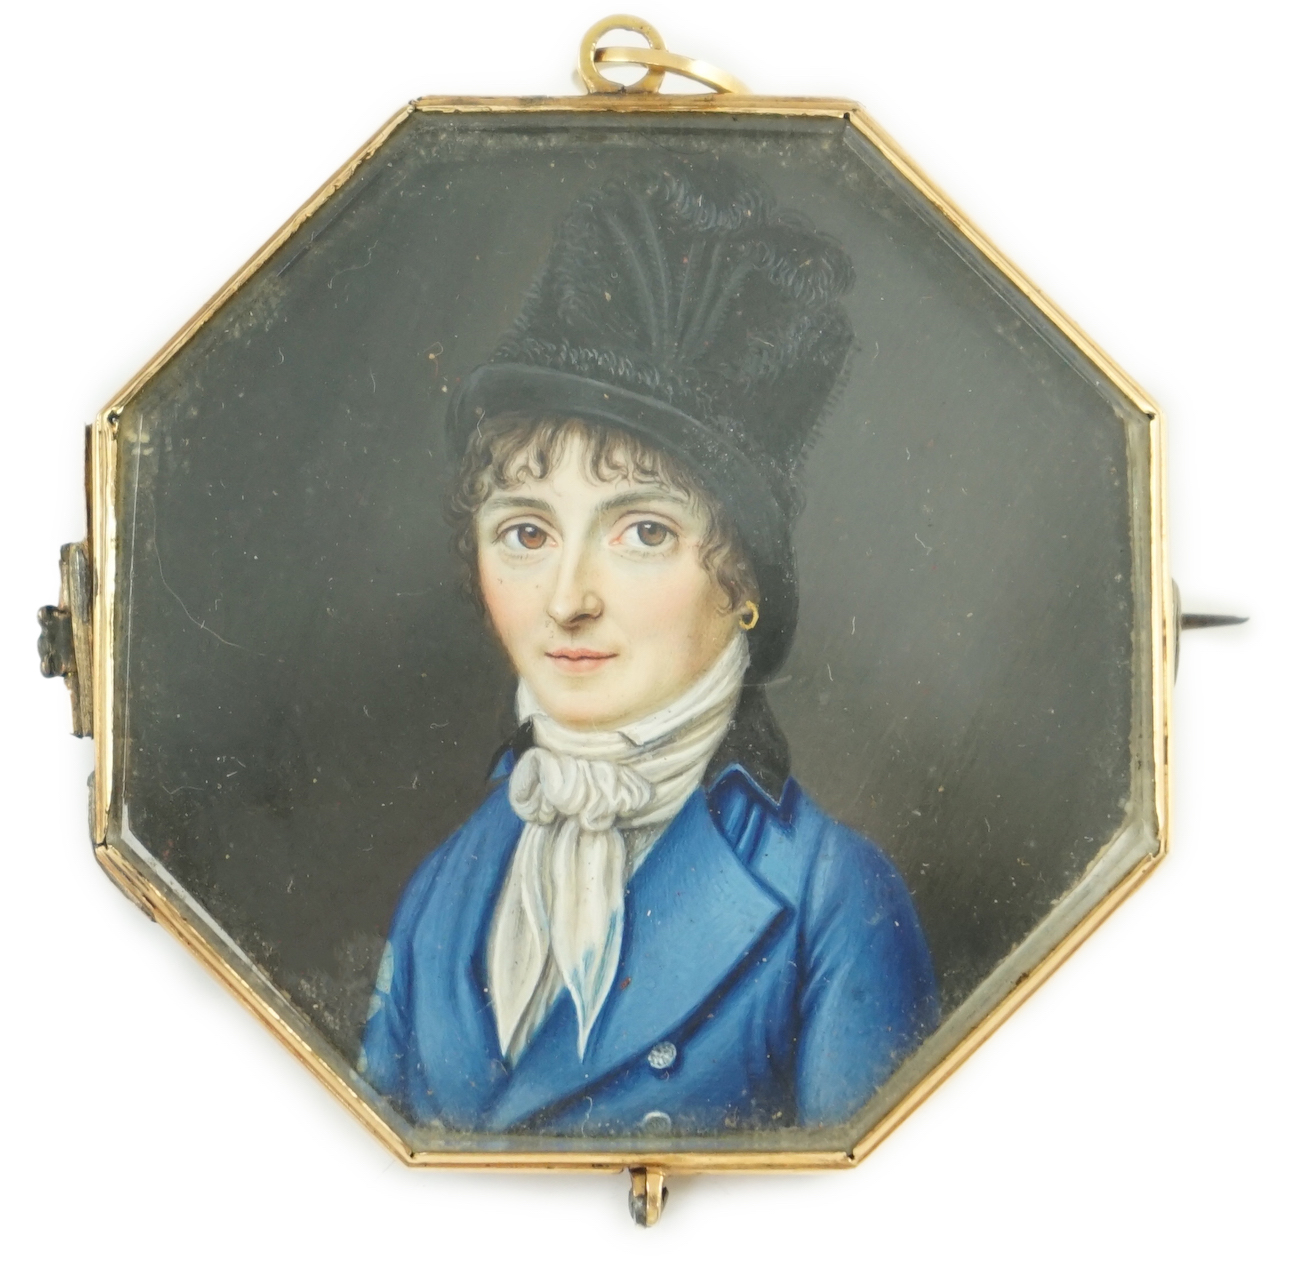 French School circa 1830, Portrait miniature of a lady wearing a black hat and blue coat, watercolour on ivory, 4.9 x 4.9cm. CITES Submission reference P7JVPY2M